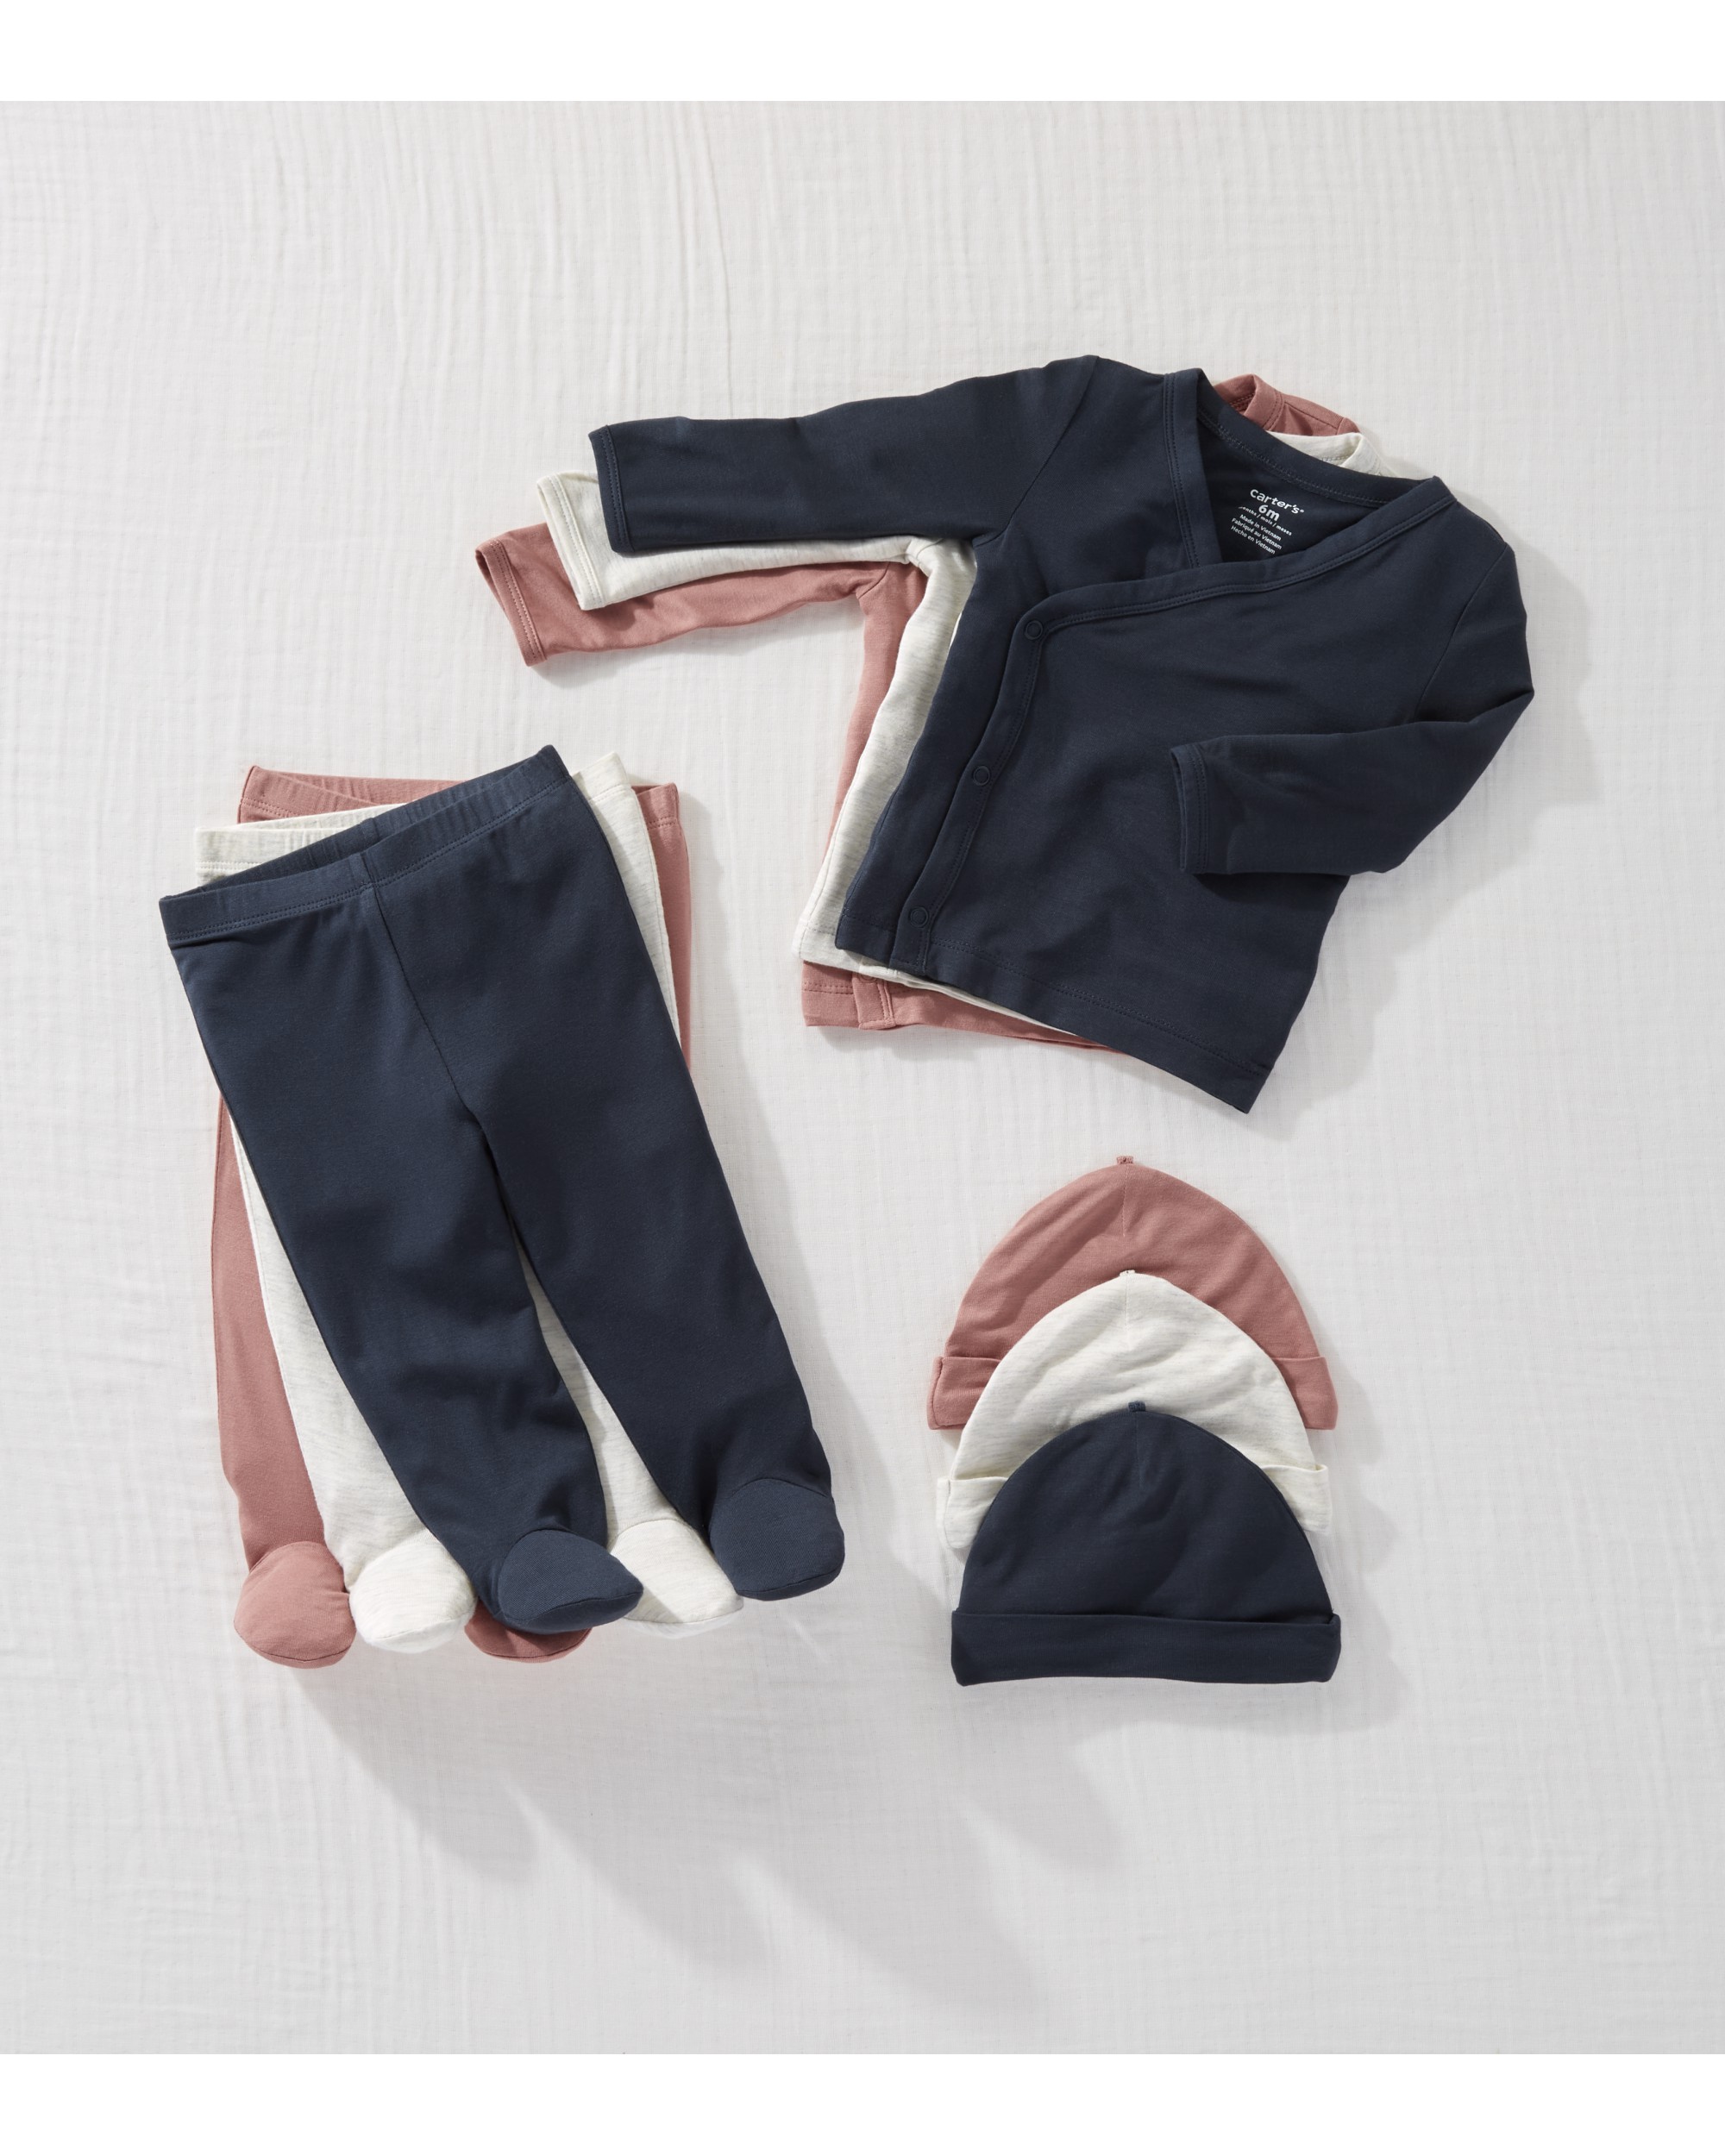 Baby 3-Piece PurelySoft Outfit